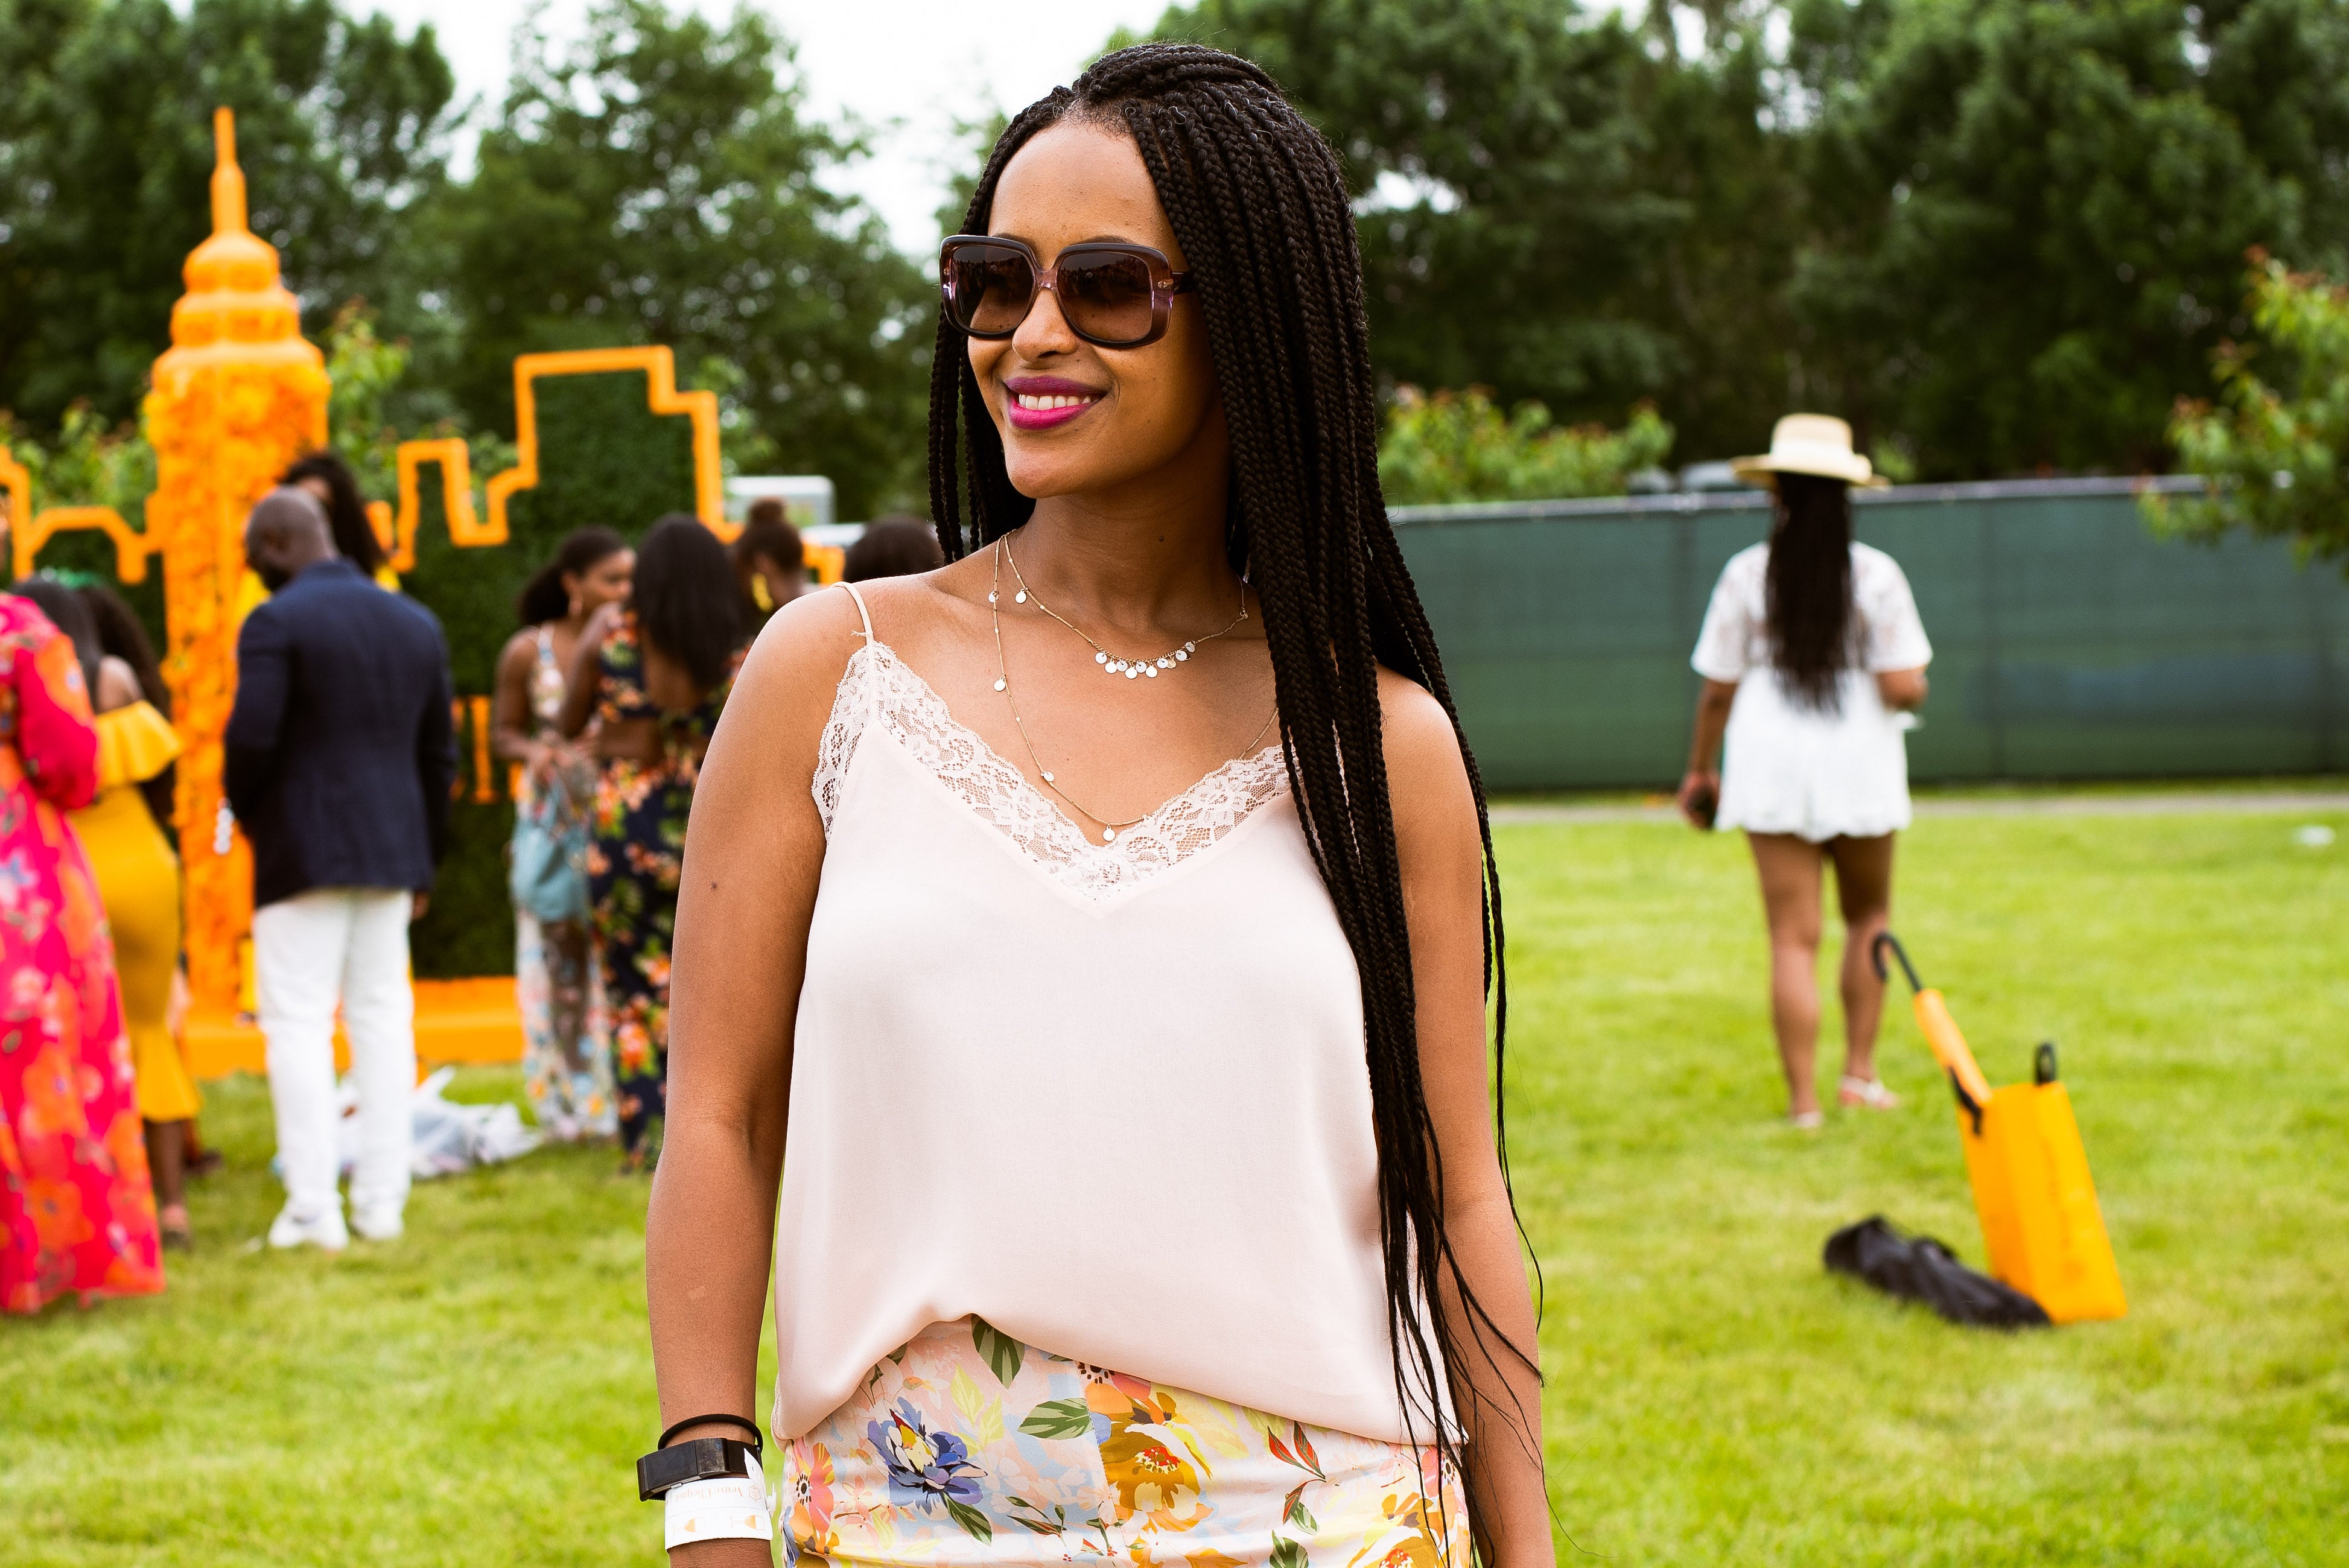 The 12th Annual Veuve Clicquot Polo Classic Gets Beautified